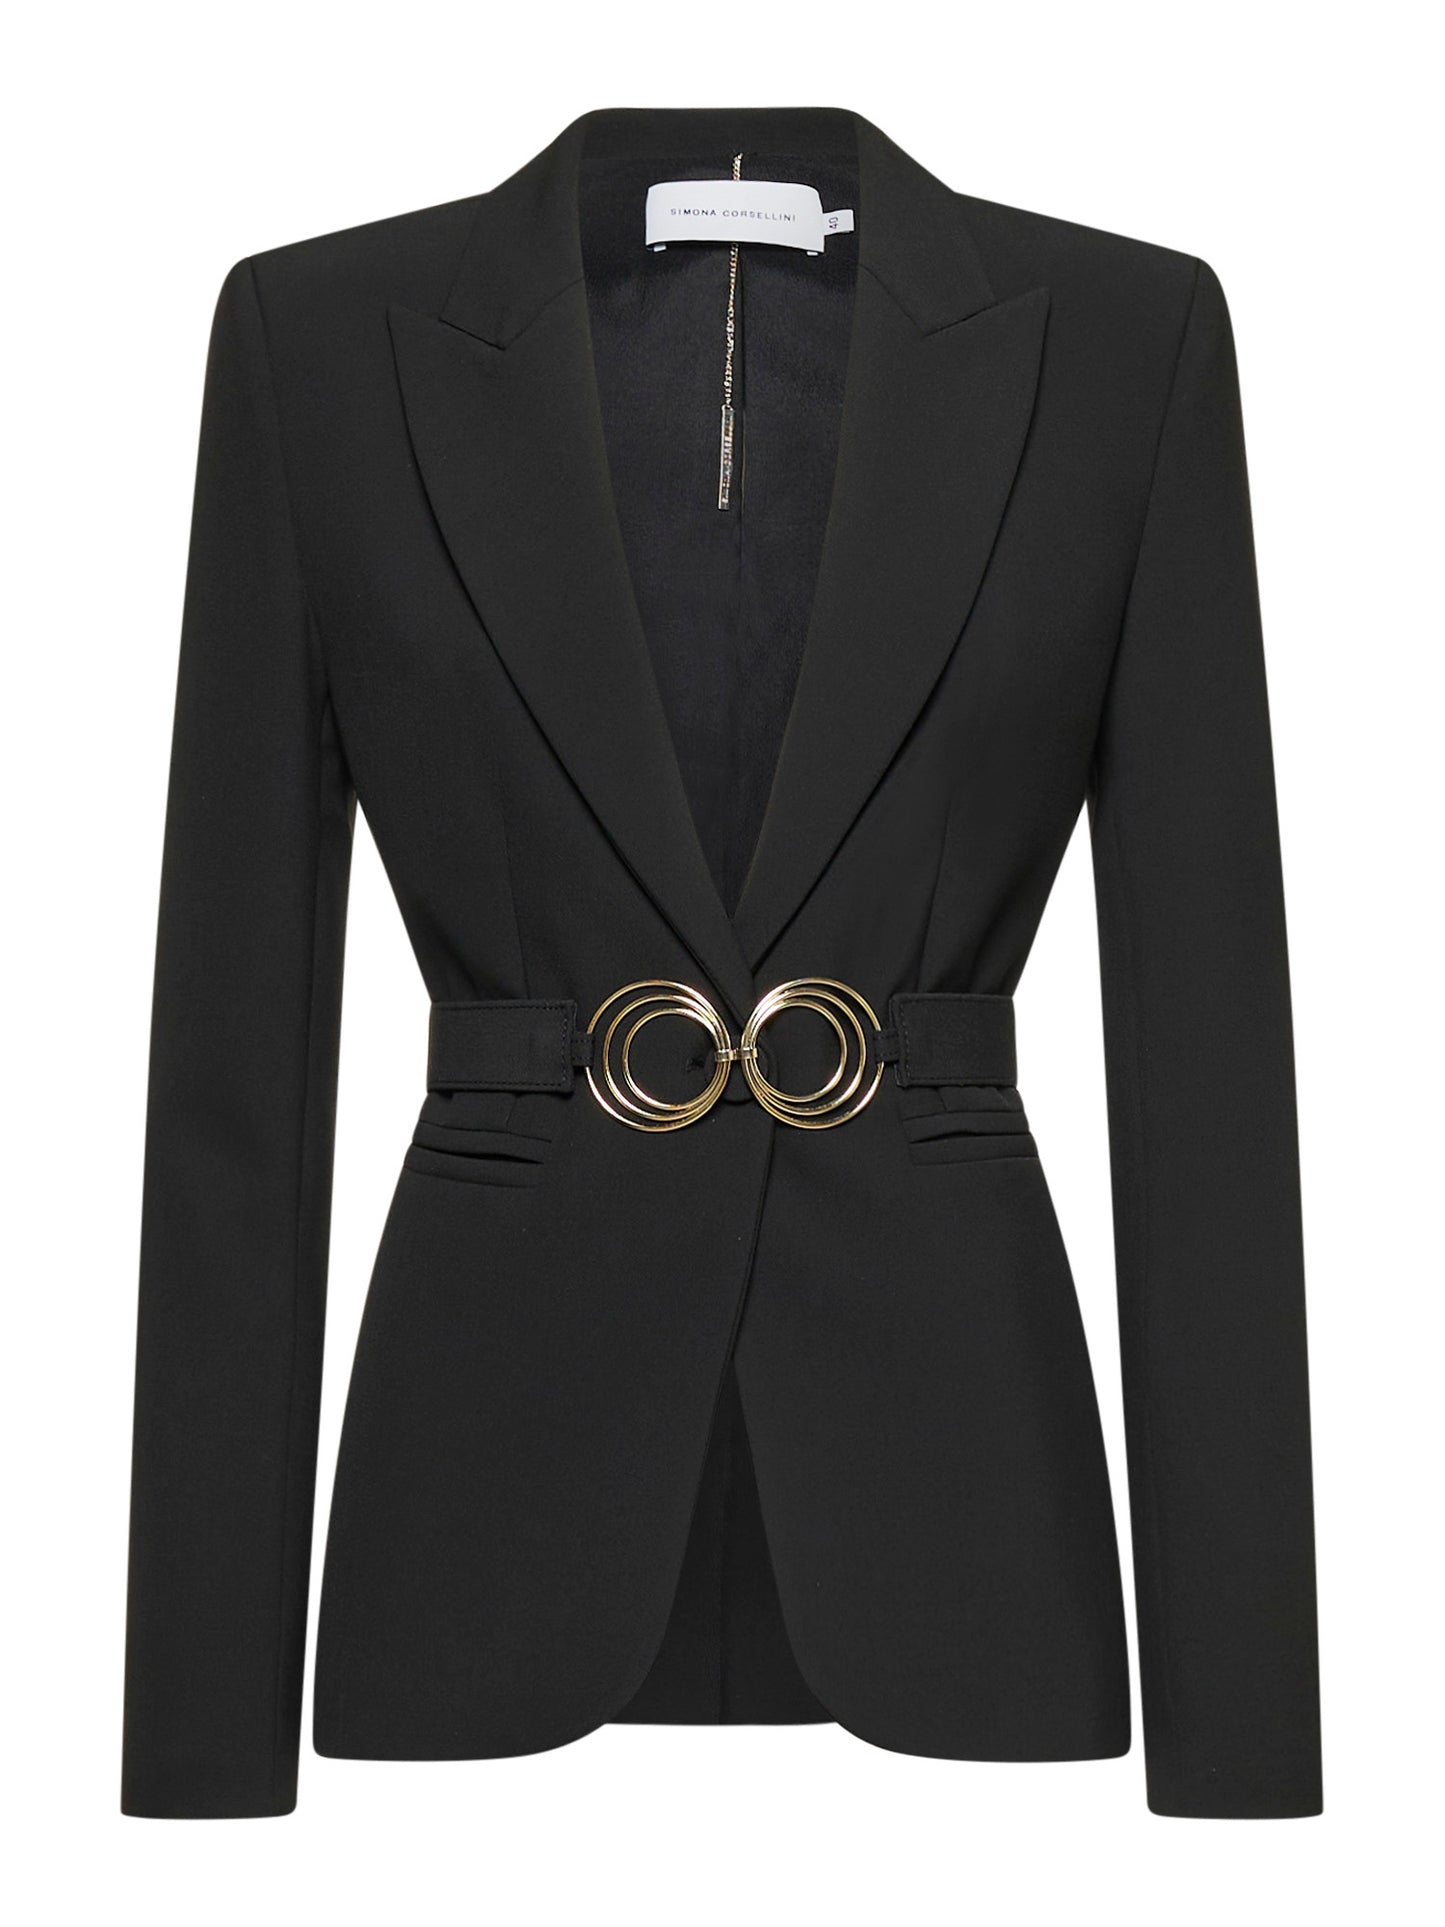 Ultra-fitted jacket with triple double ring detail